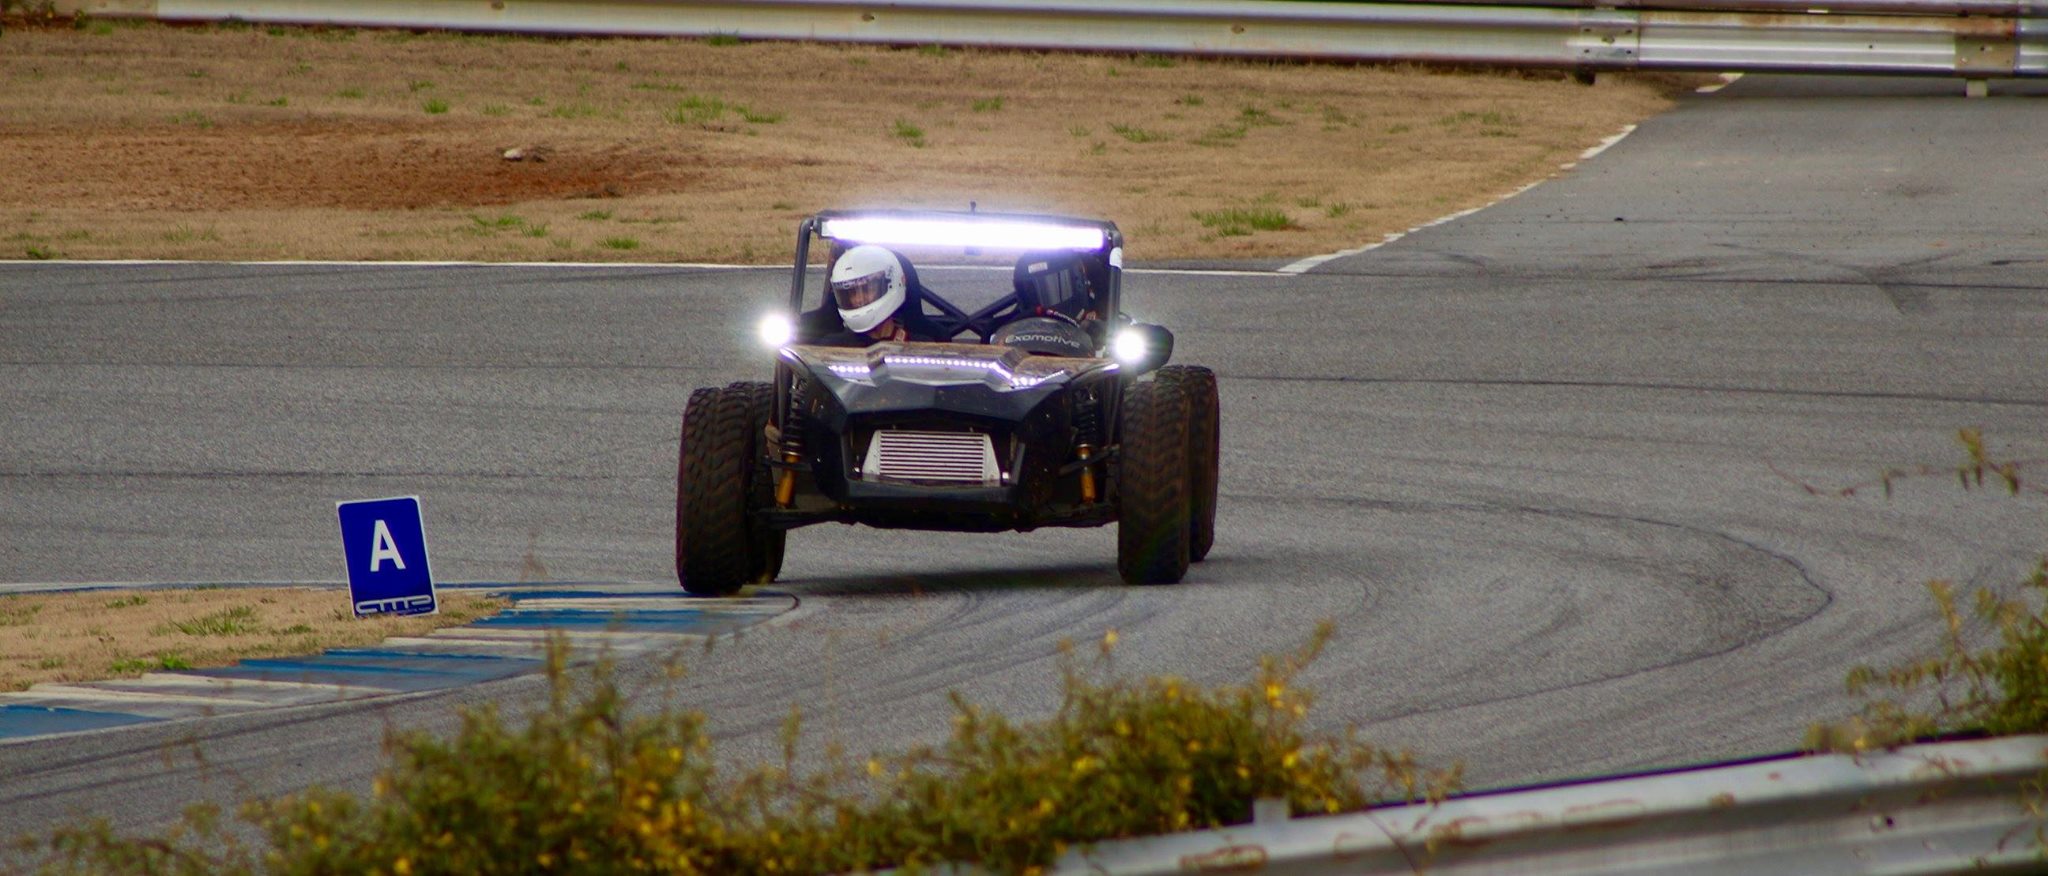 The Off-Road hits the track!